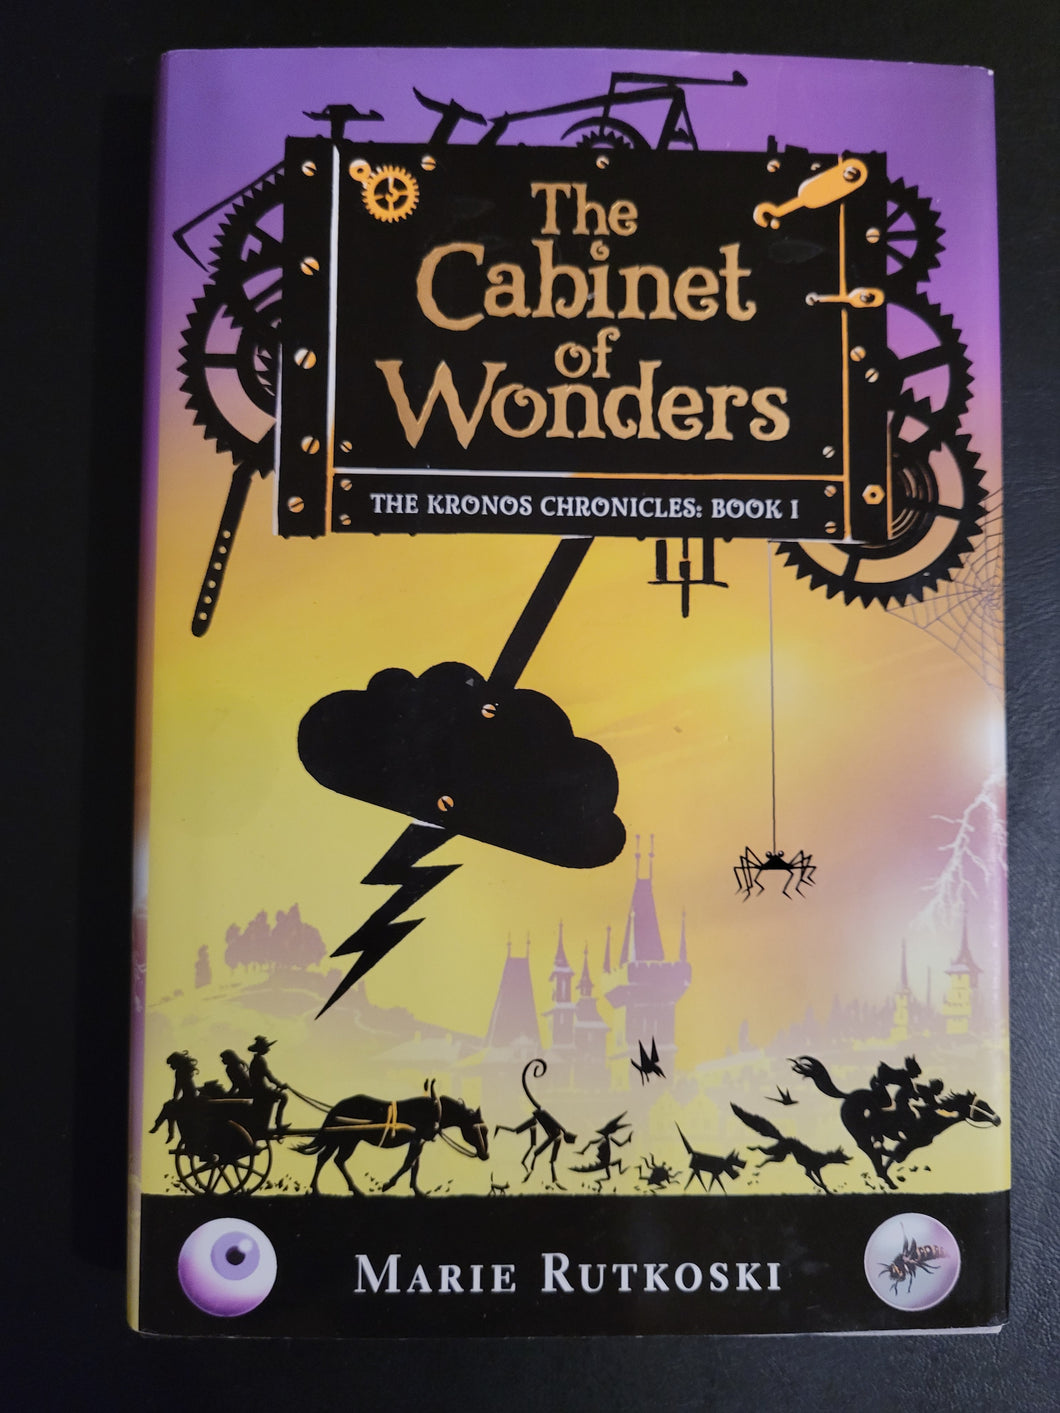 The Cabinet of Wonders: The Kronos Chronicles Book 1